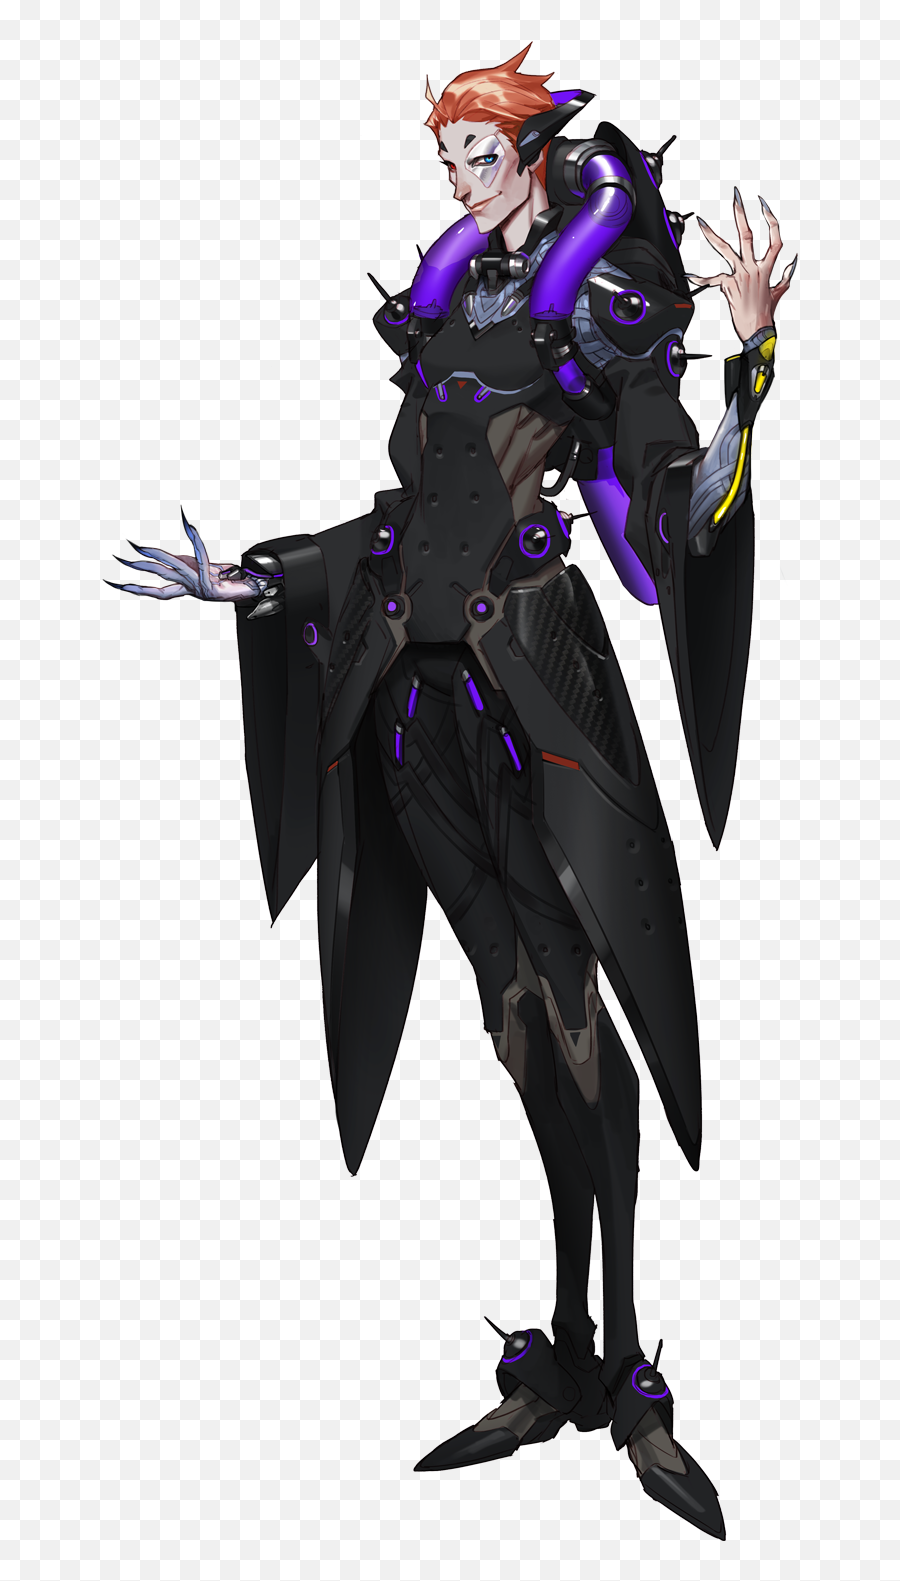 Moira Overwatch Png Image - Moira Overwatch,Moira Png